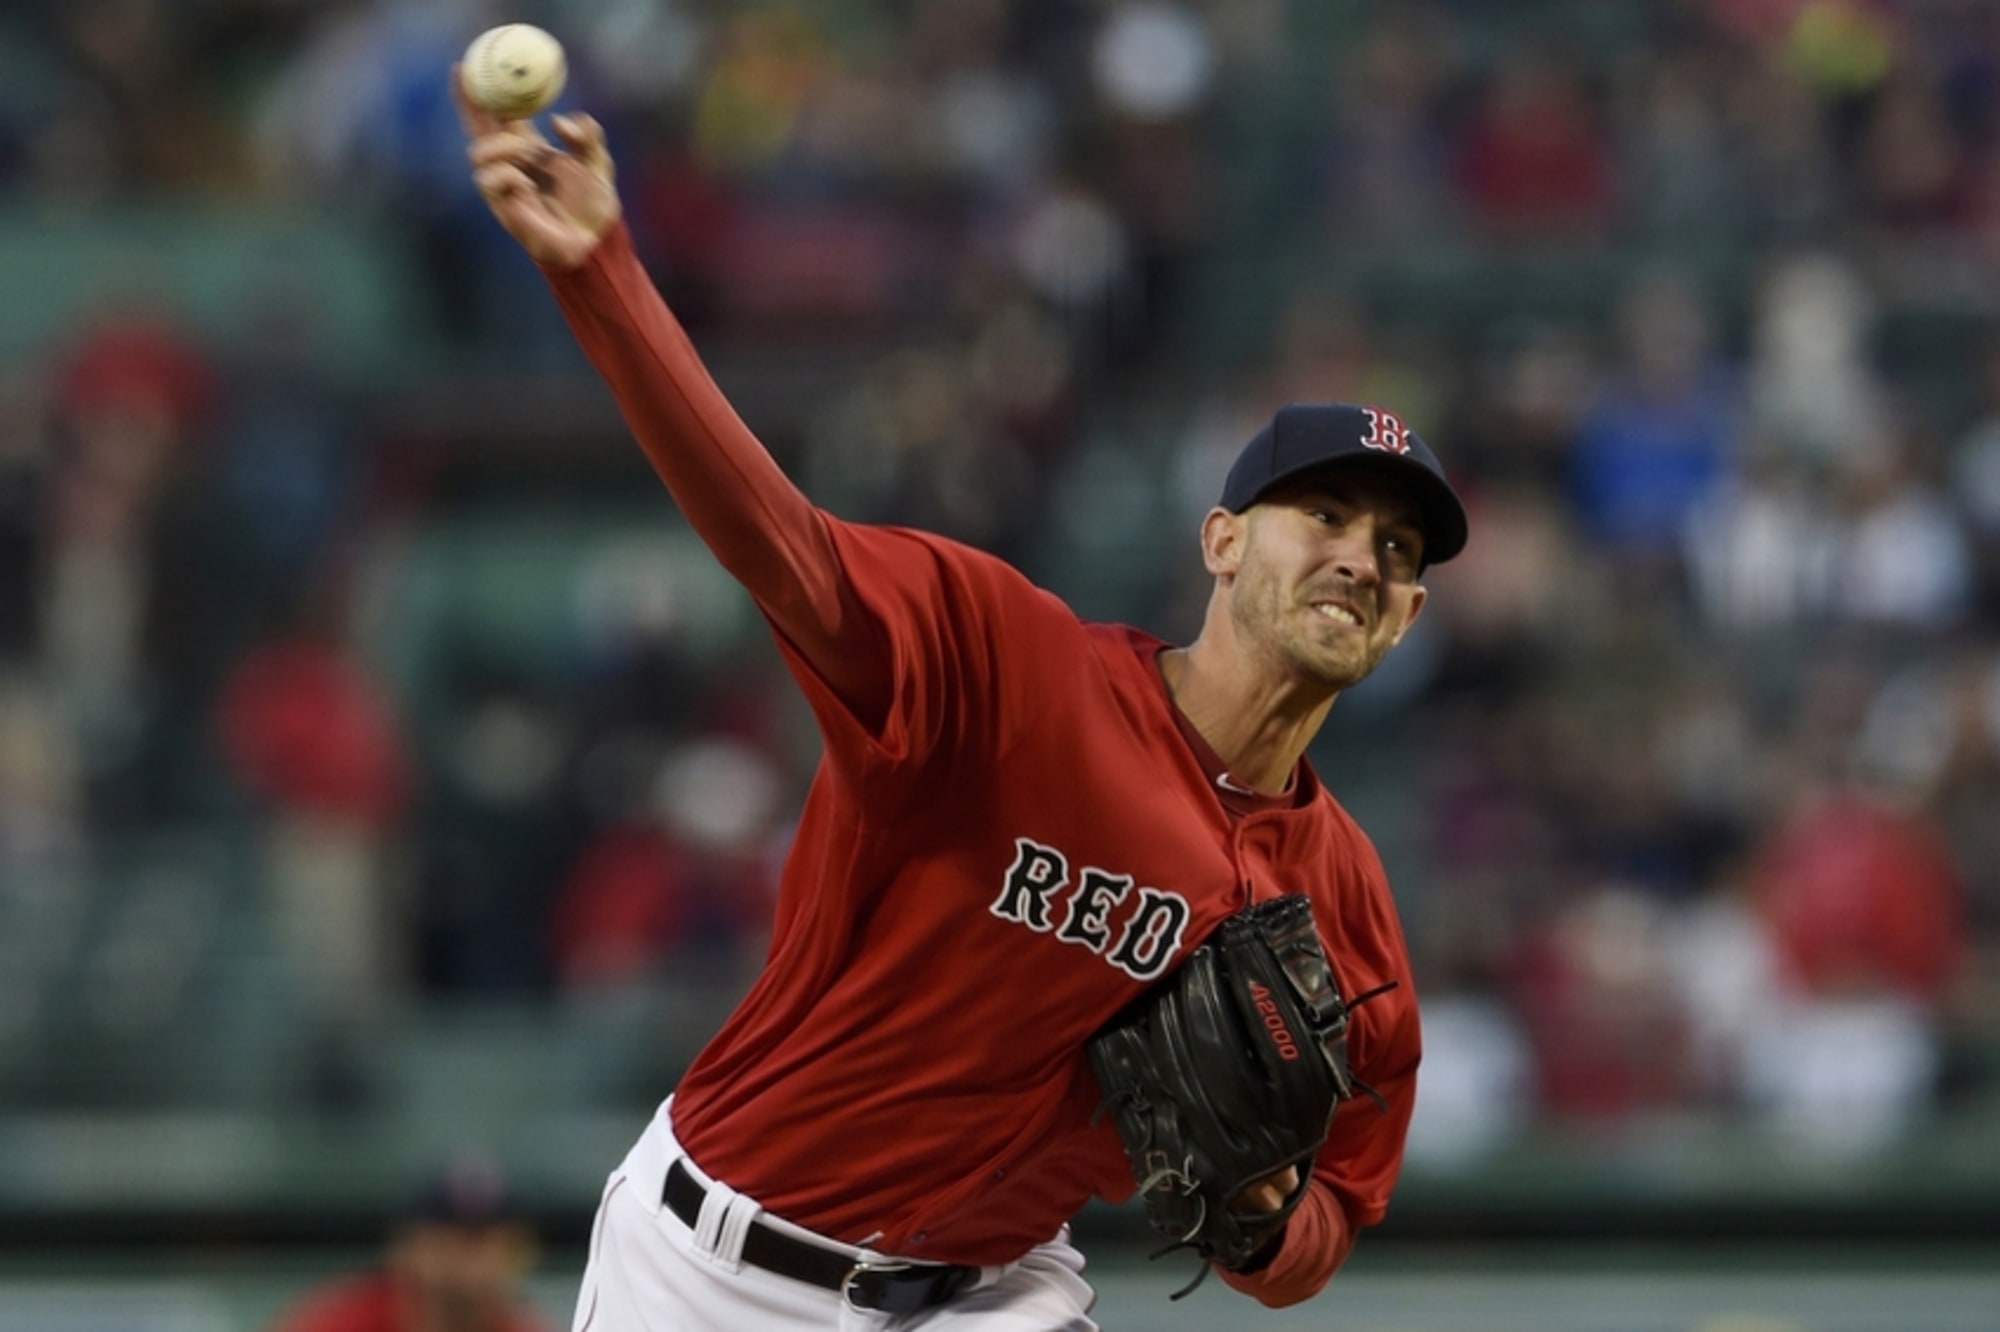 Red Sox: Has Rick Porcello found himself in Boston?